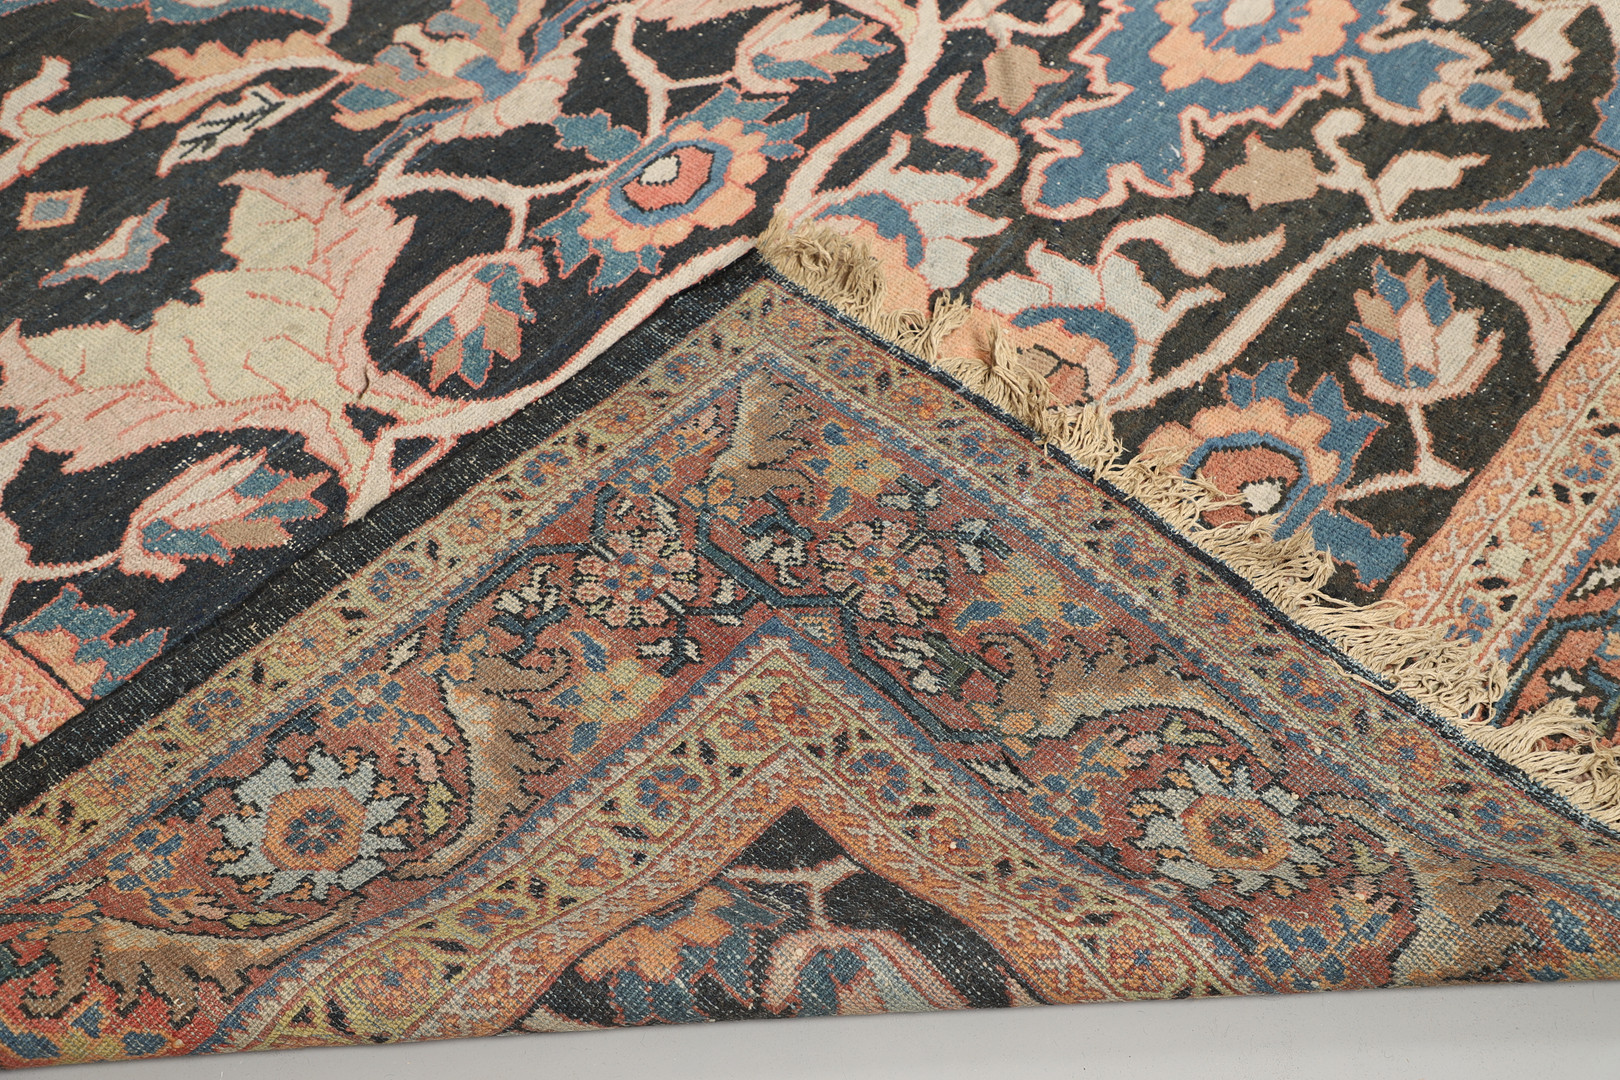 A SULTANABAD CARPET, WEST IRAN, CIRCA 1930. - Image 7 of 9